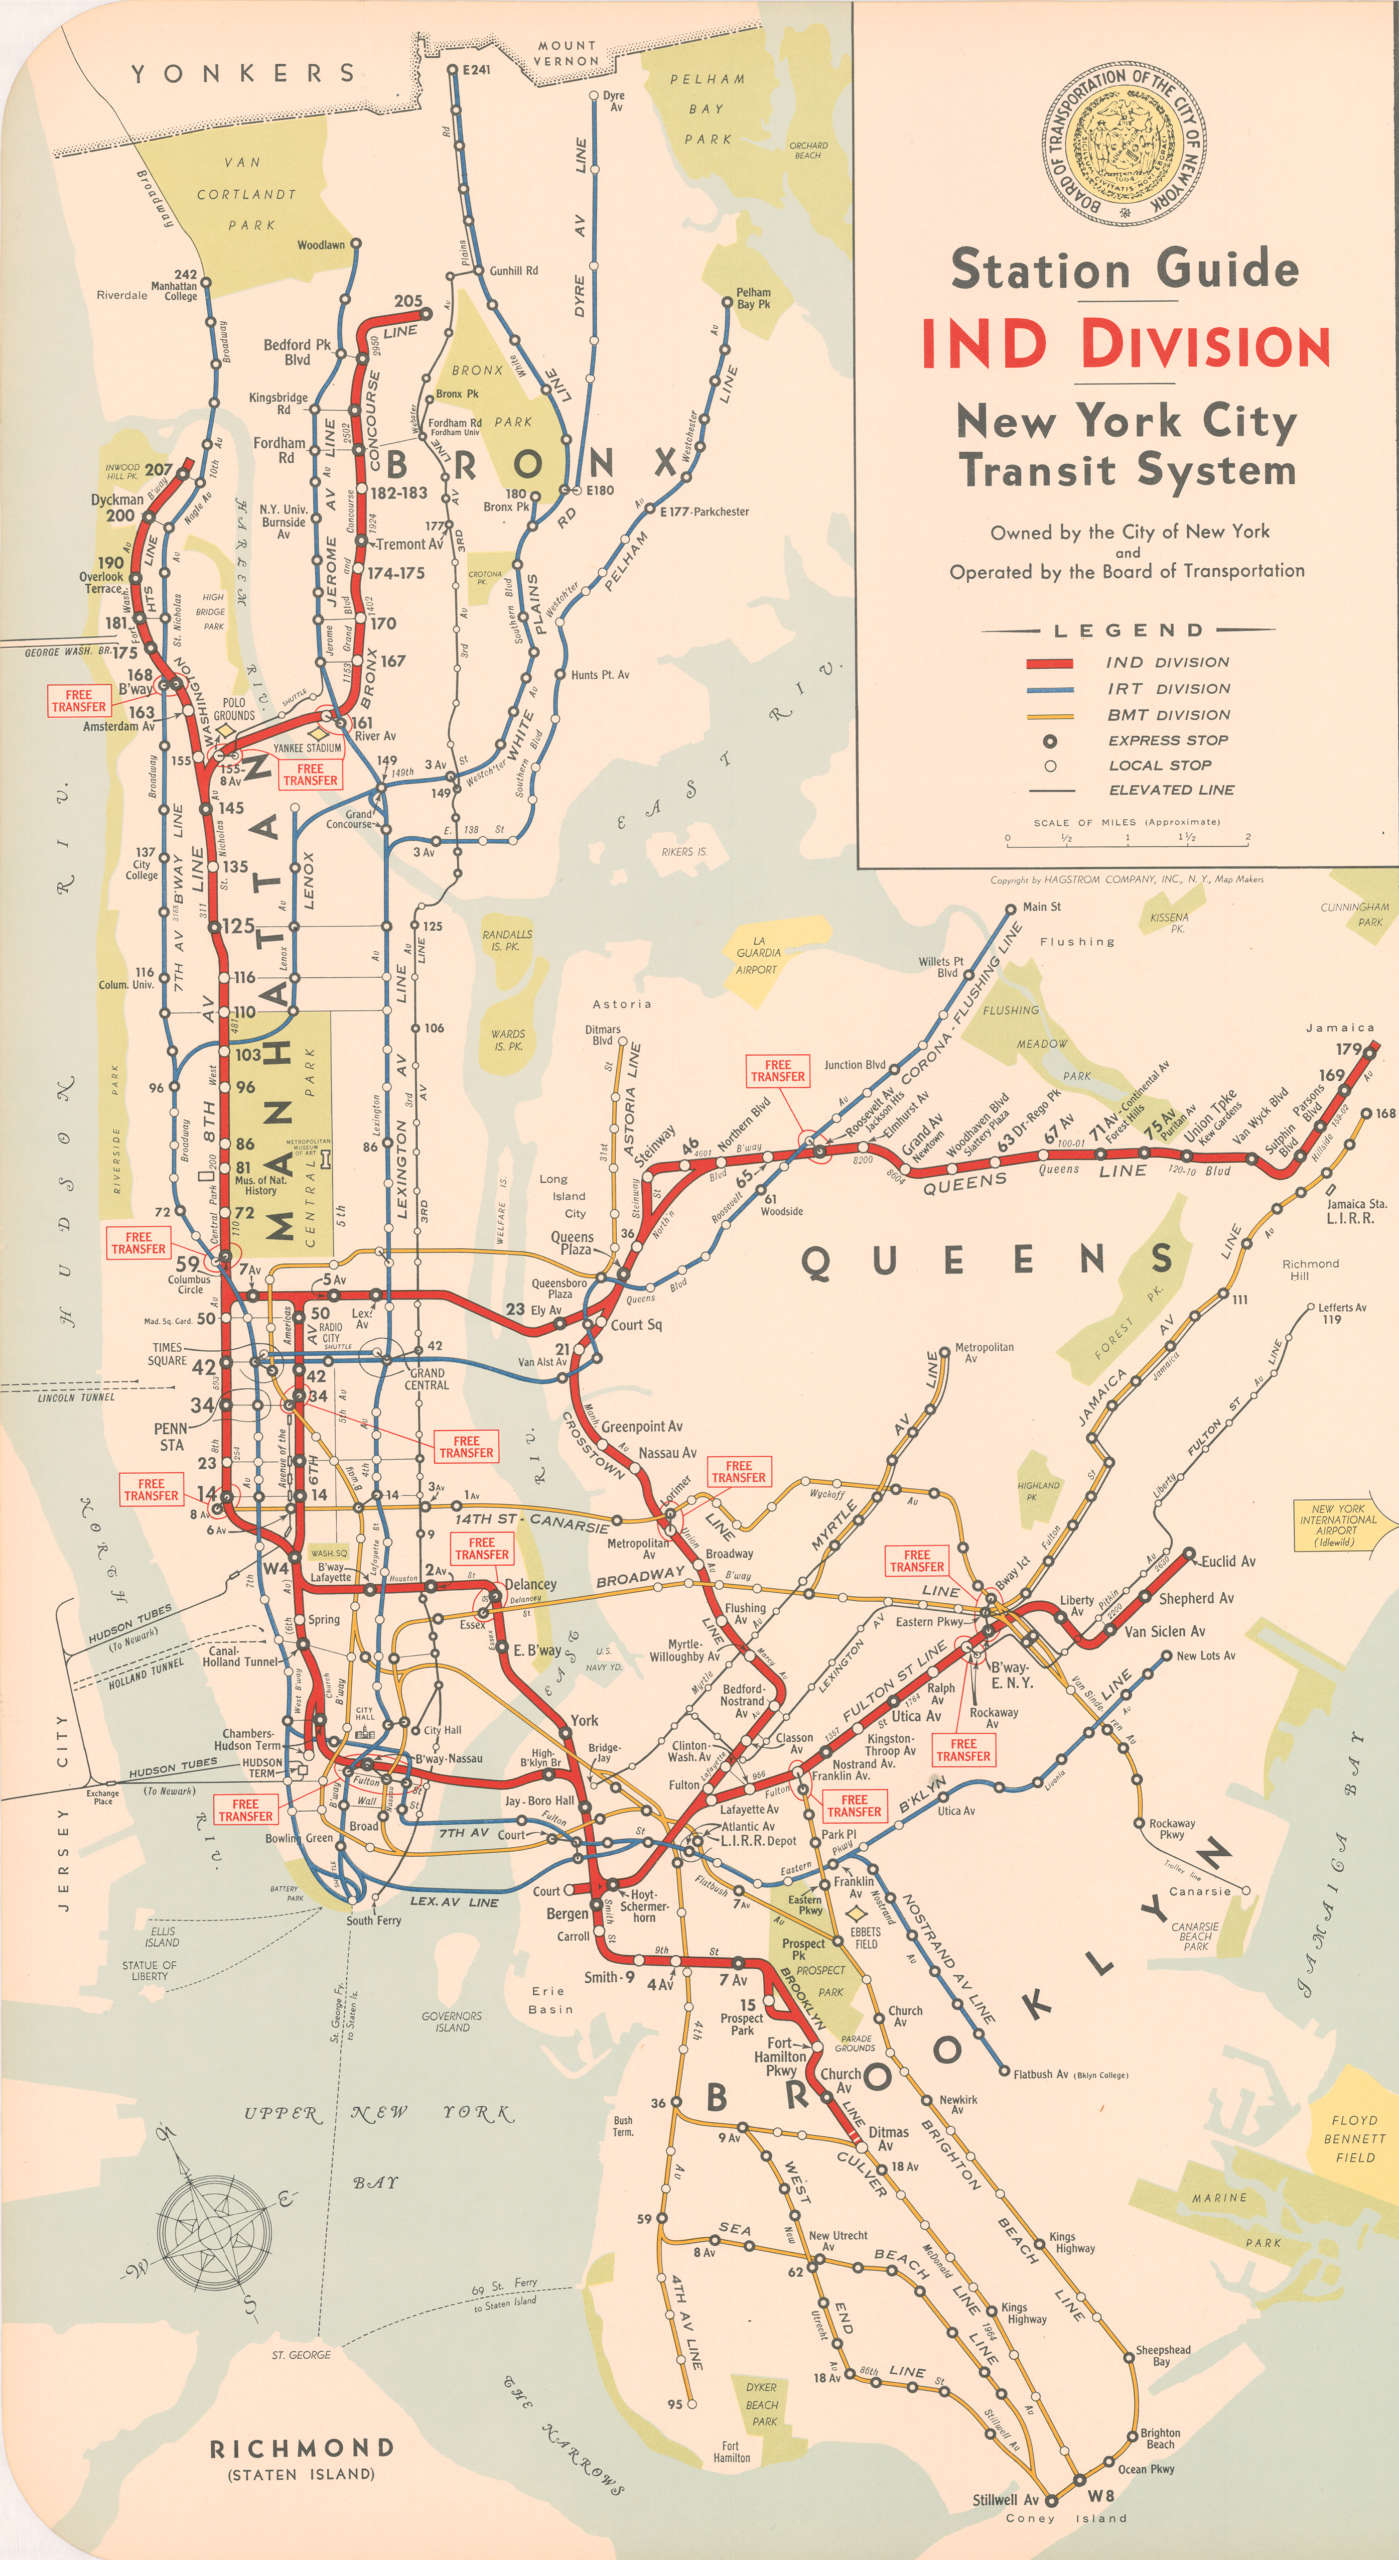 Station Guides, 1948, XX.2014.6.11; New York Transit Museum